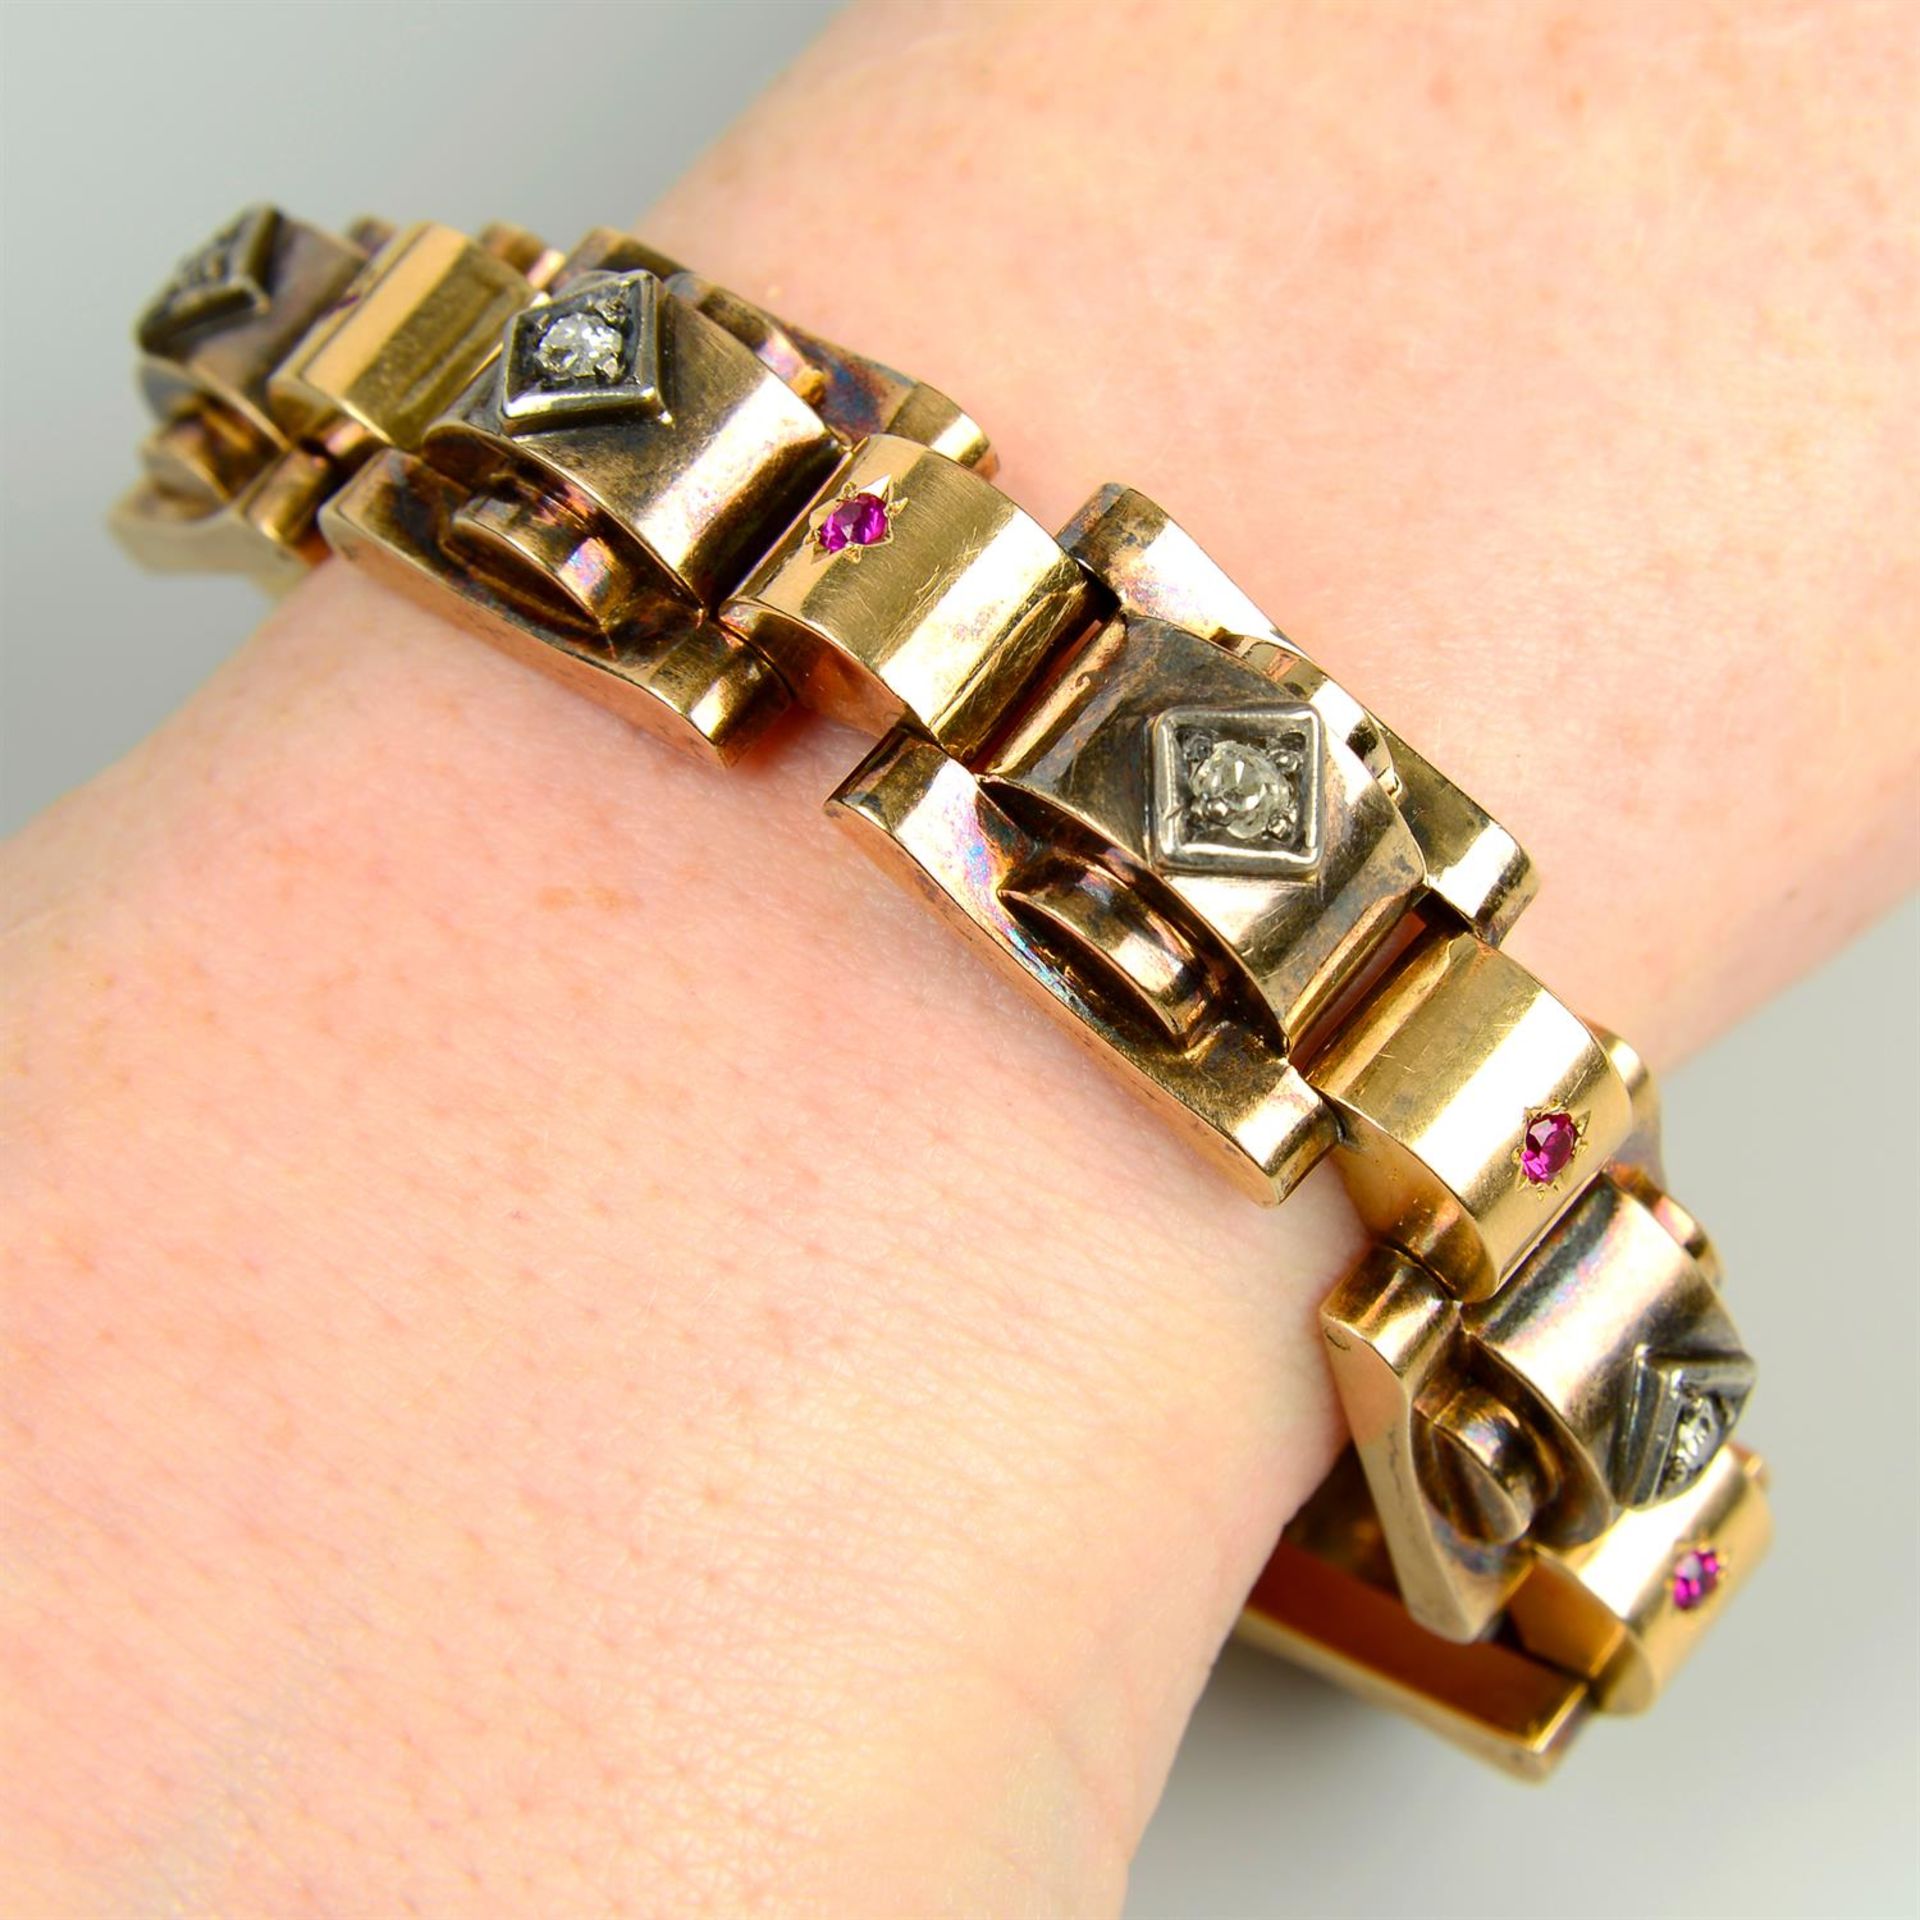 A mid 20th century gold, old-cut diamond and synthetic ruby 'tank' bracelet.